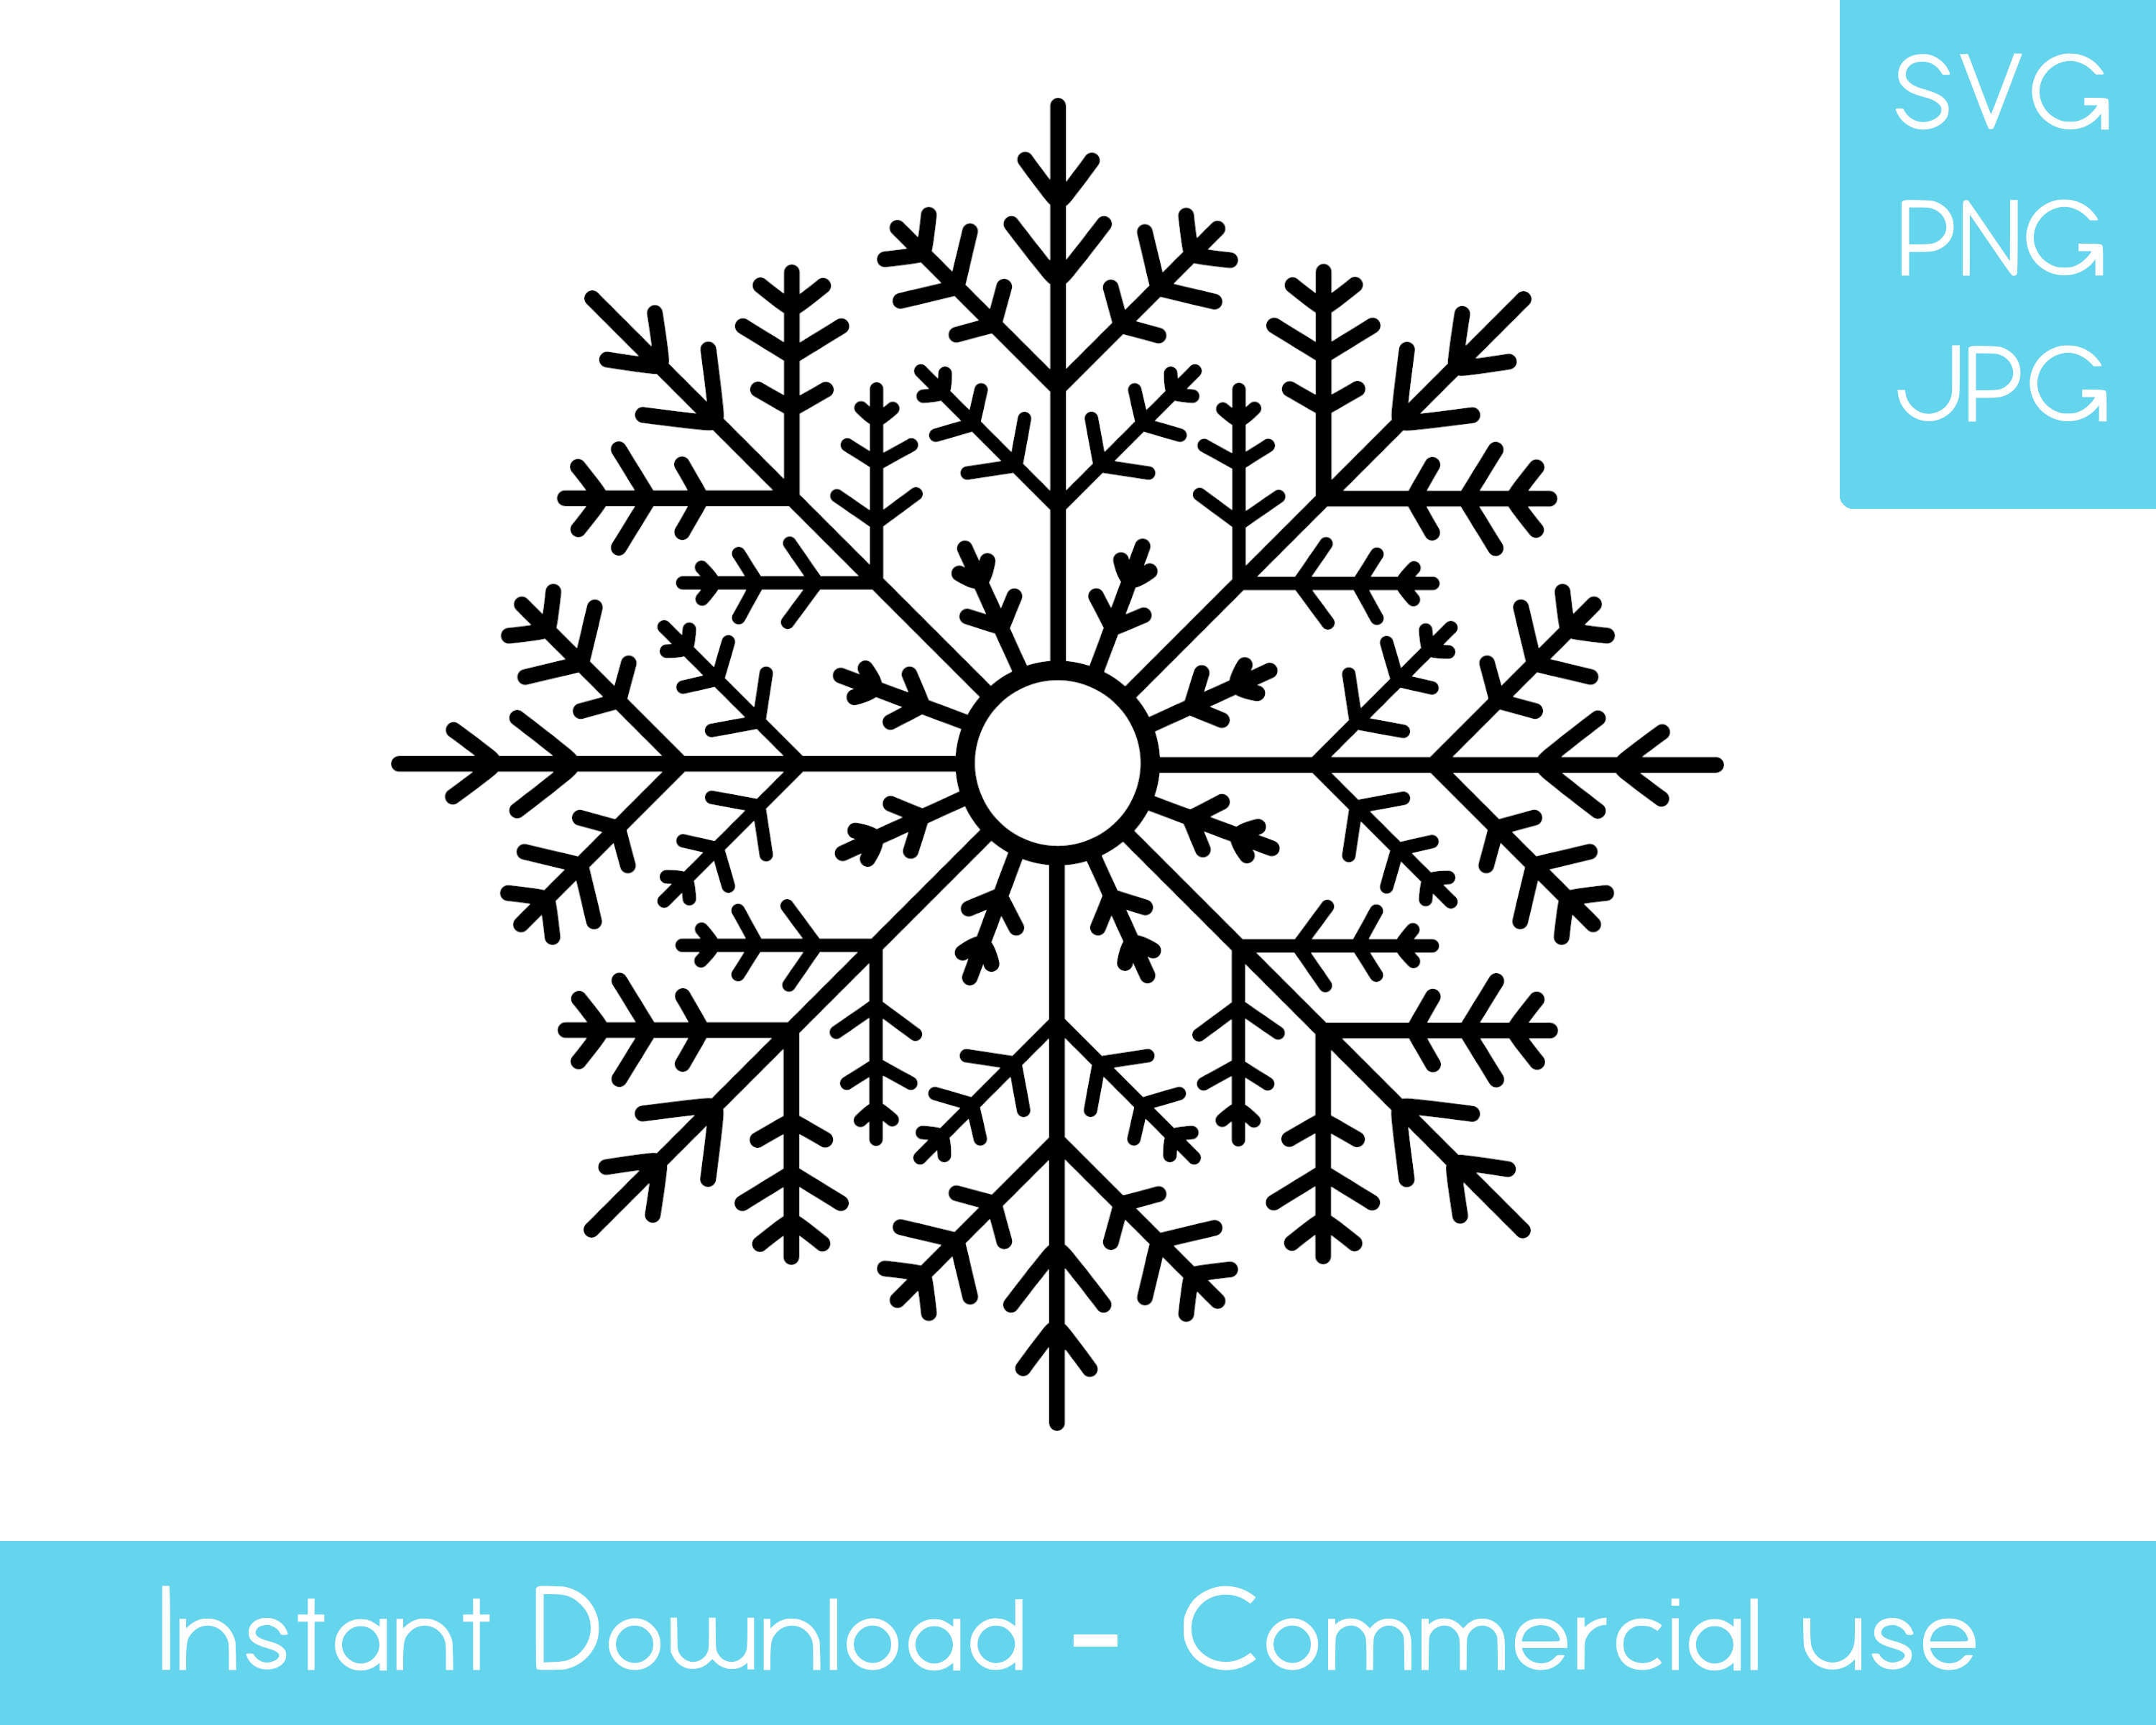 Fancy snowflake svg png jpg commercial use allowed | Etsy